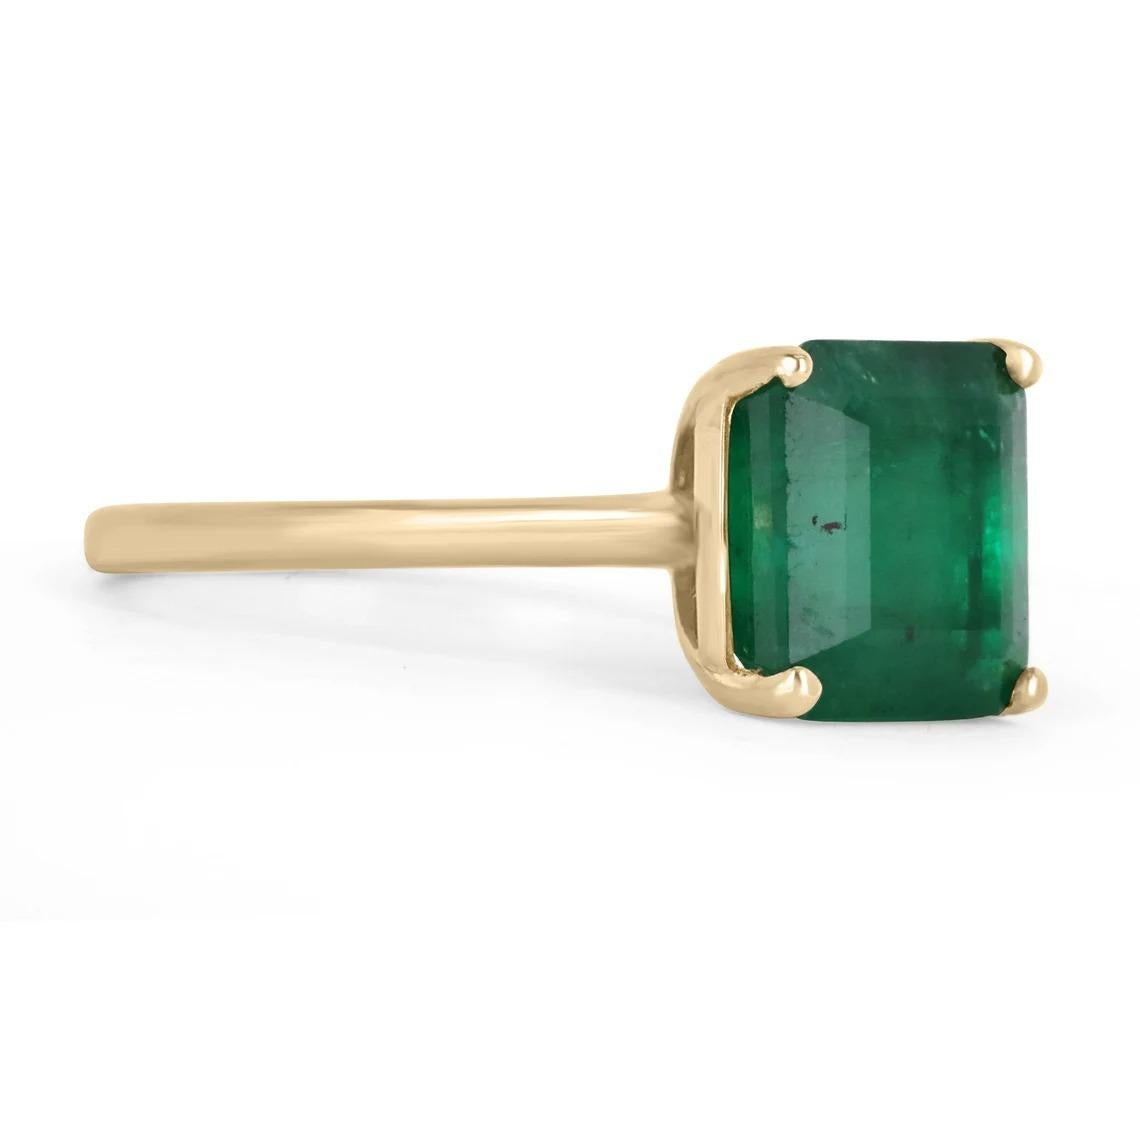 Displayed is a classic Brazilian emerald solitaire emerald-cut engagement ring/right-hand ring in 14K yellow gold. This gorgeous solitaire ring carries a full 3.40-carat emerald in an offset four-prong setting. Fully faceted, this gemstone showcases